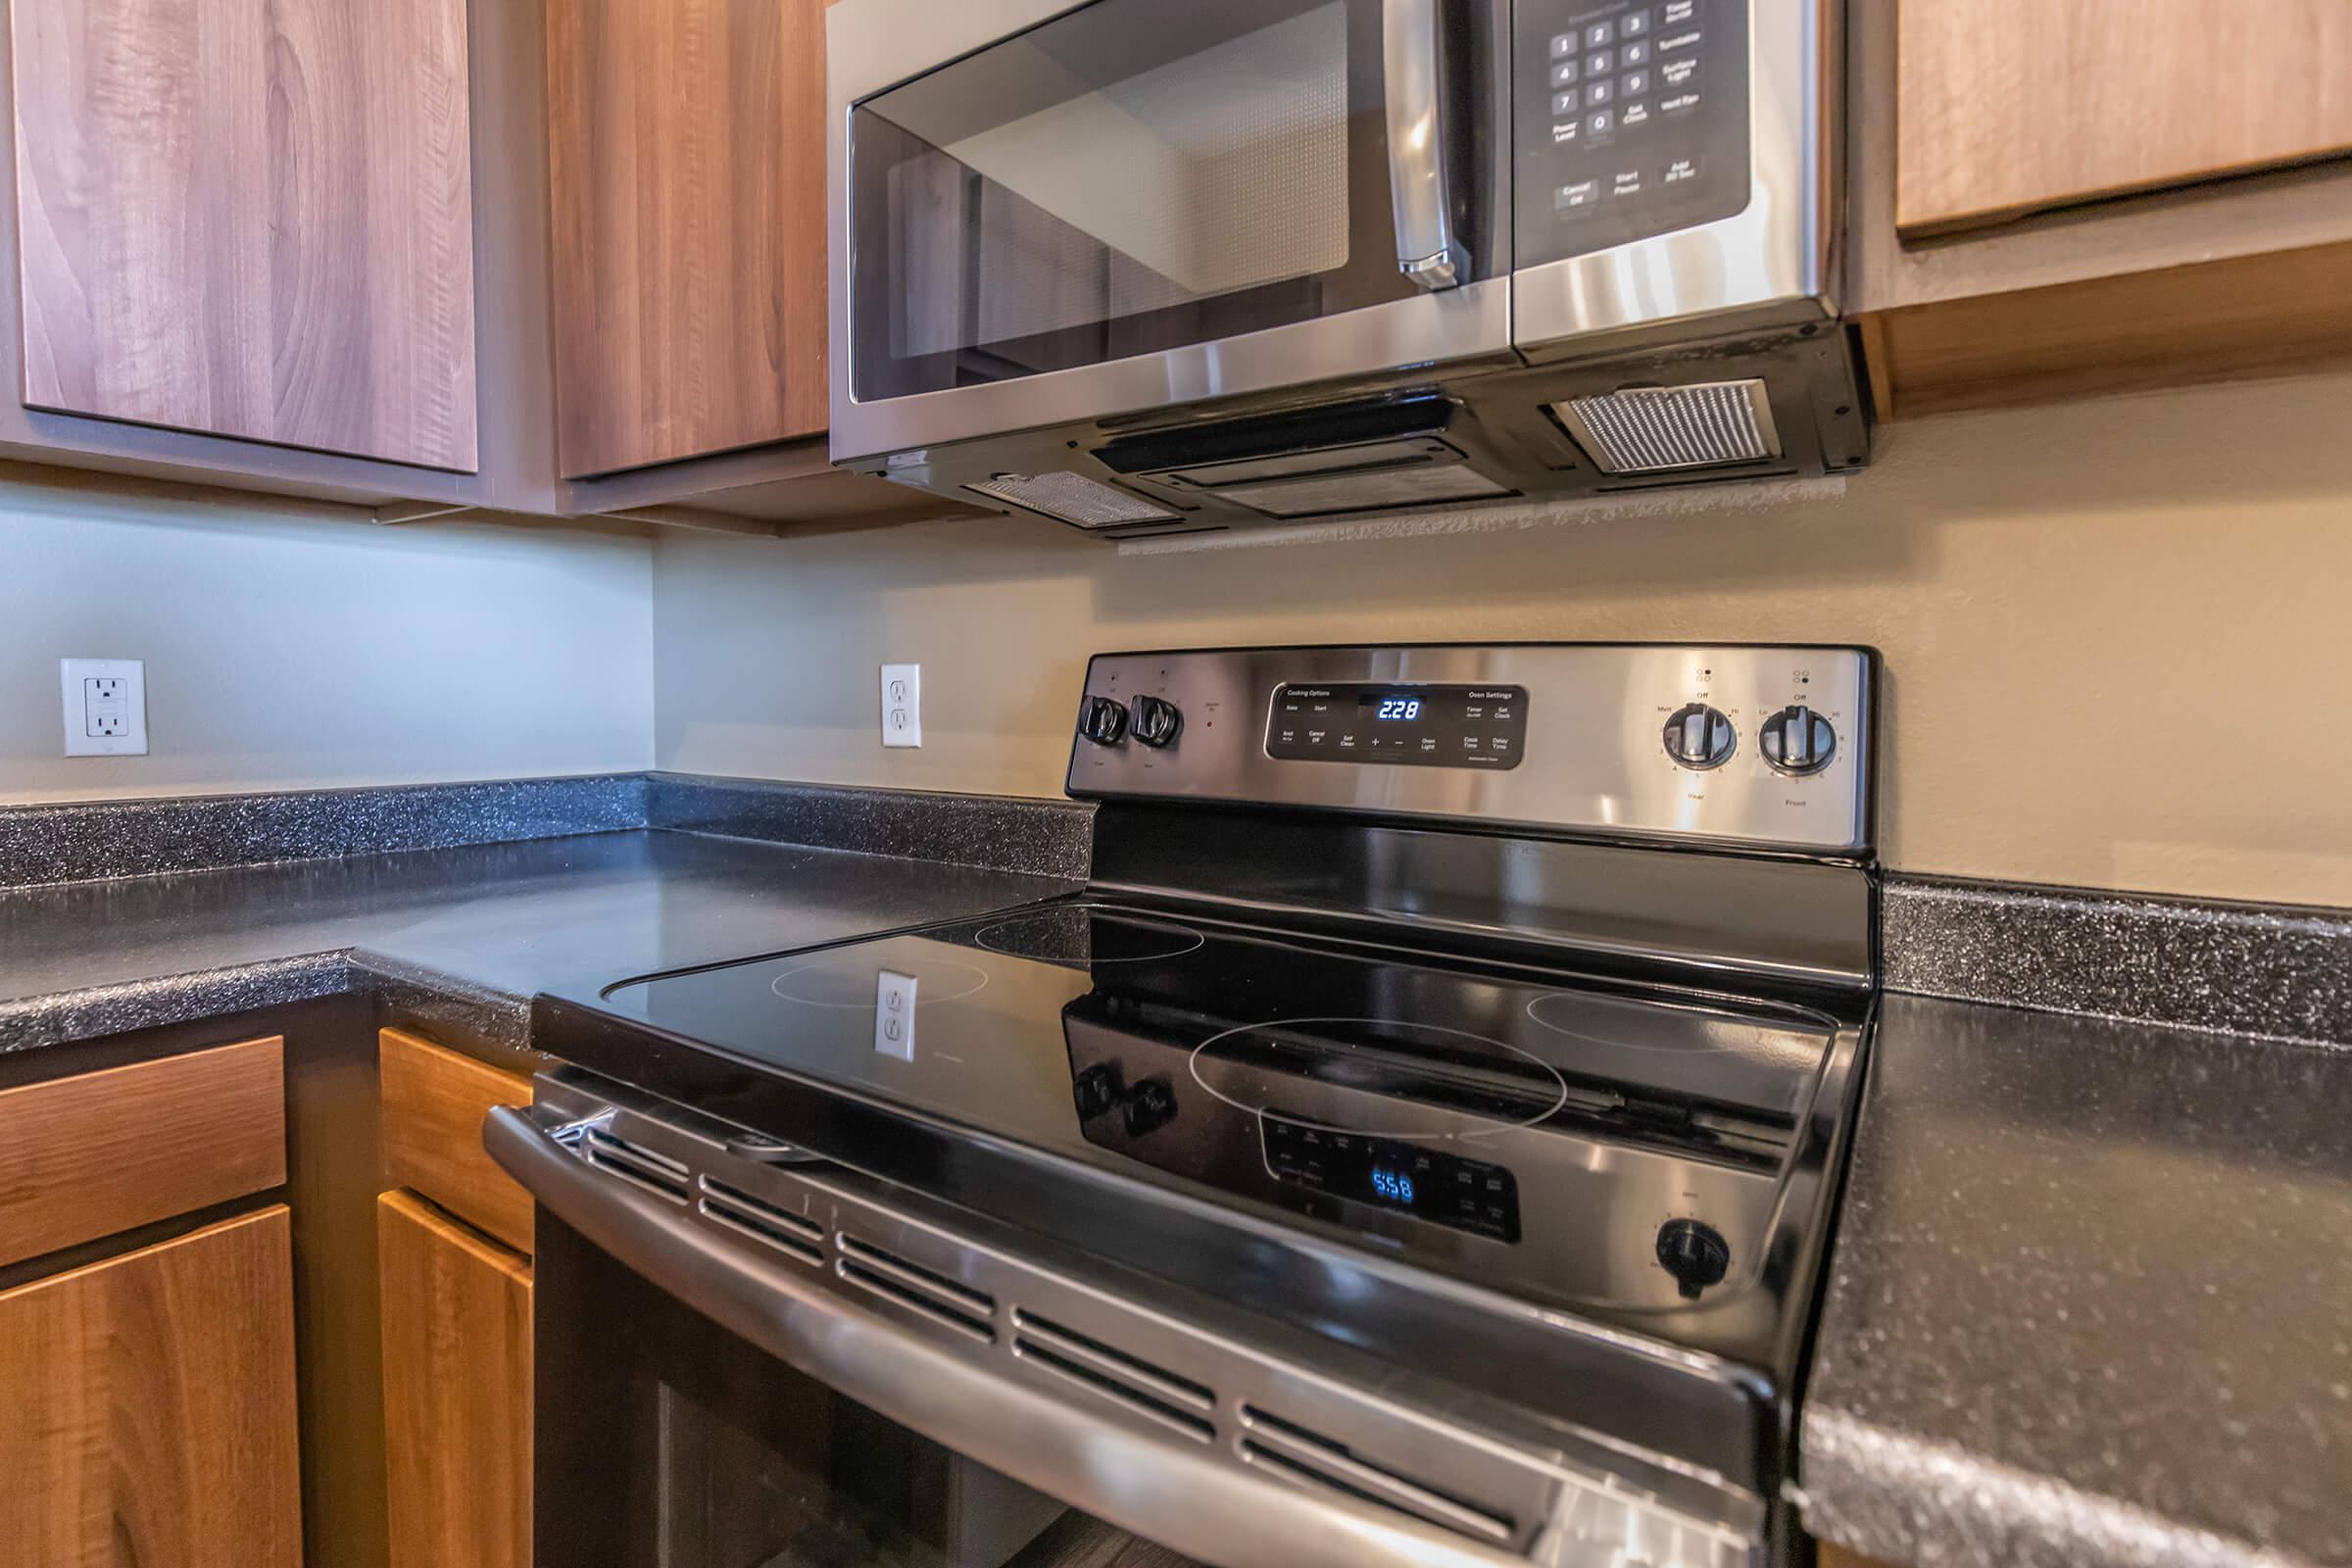 STAINLESS STEAL APPLIANCES